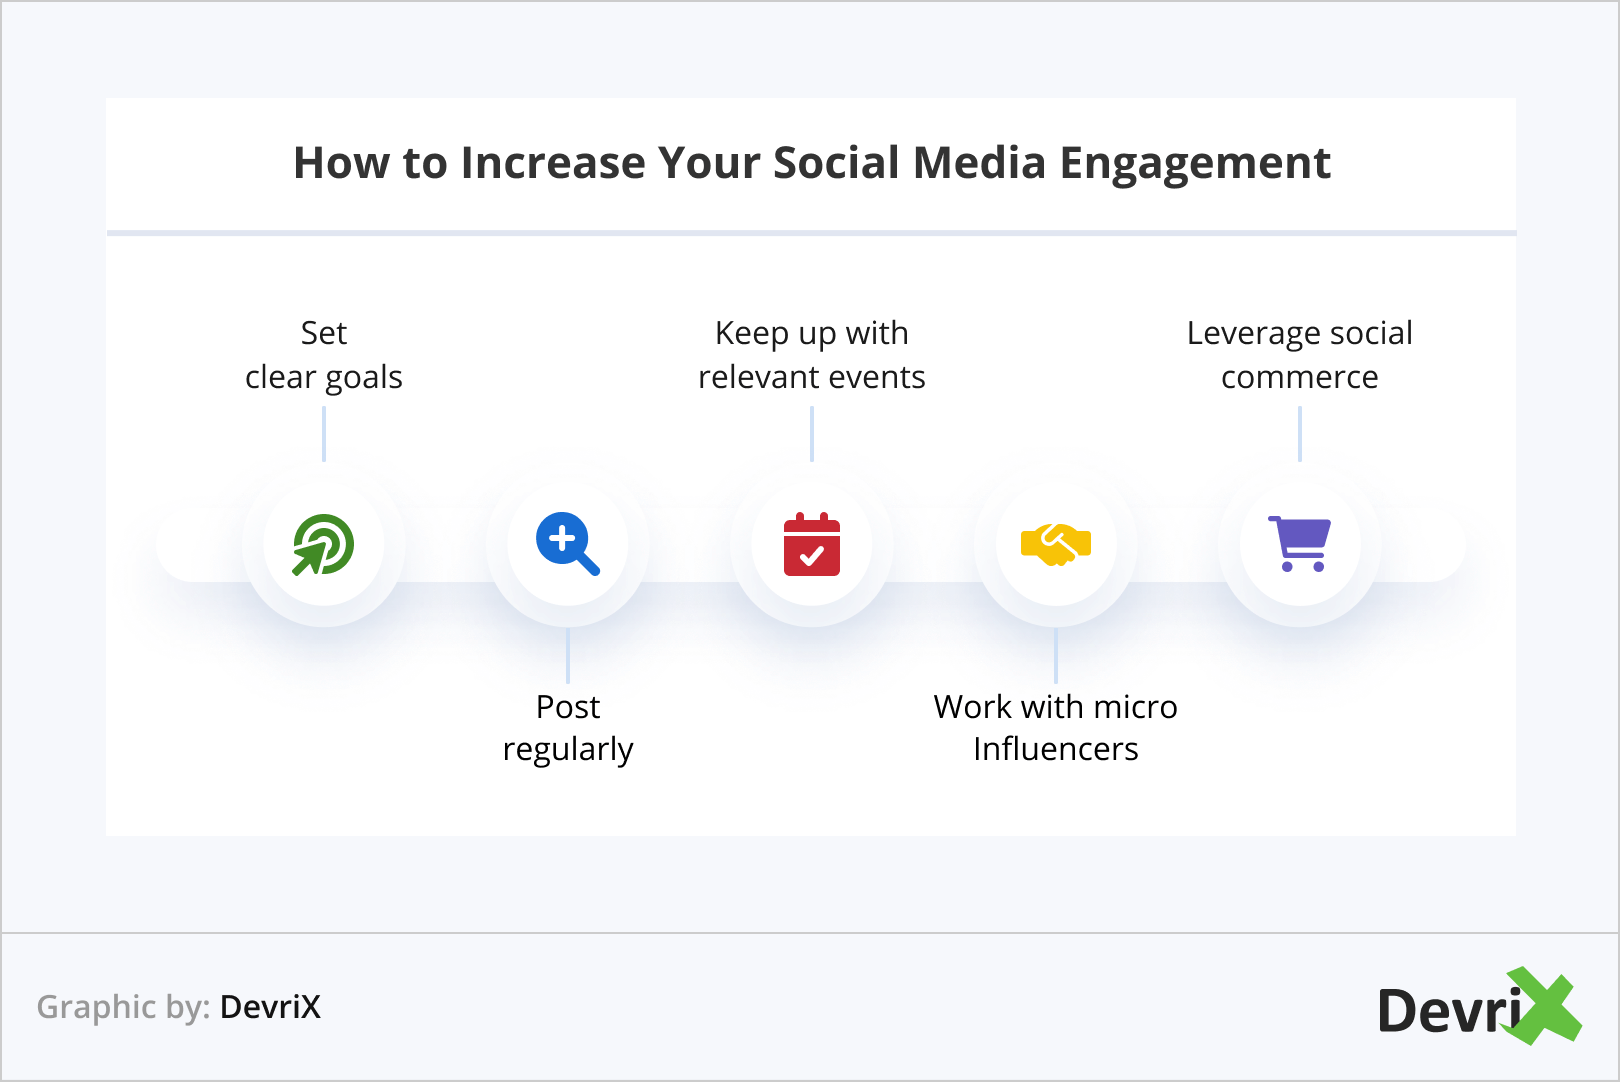 How to Increase Your Social Media Engagement